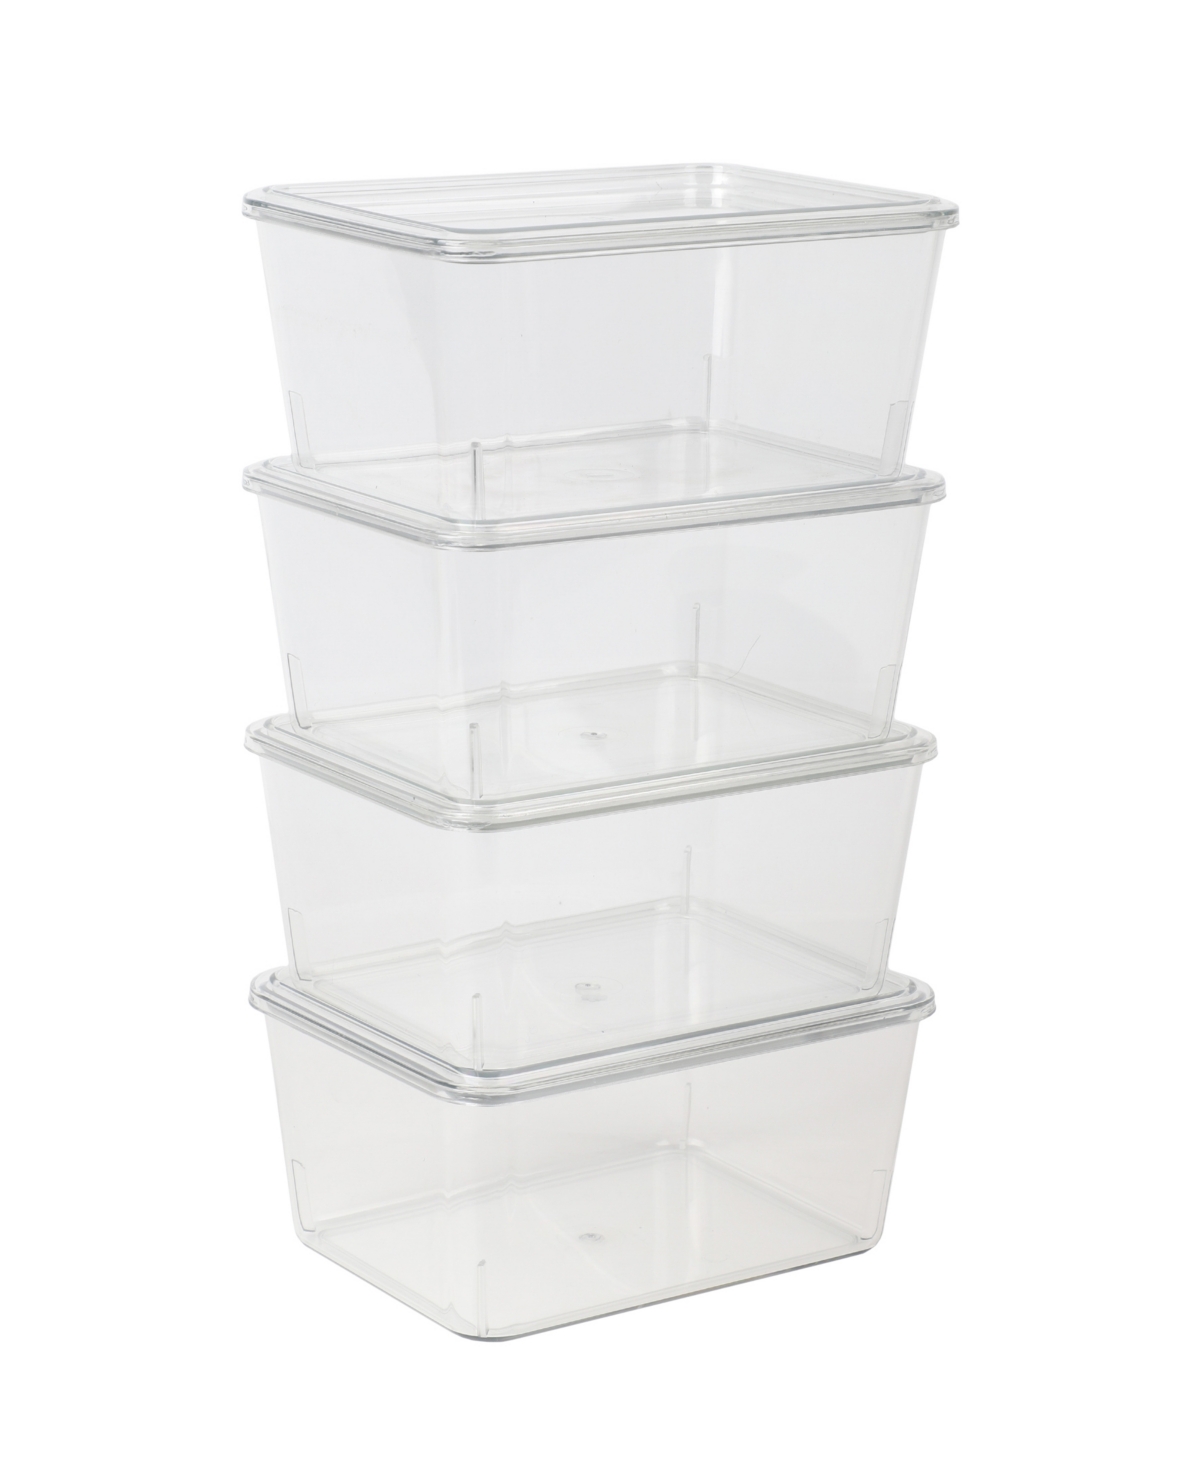 Martha Stewart Brody 4 Pack Stackable Plastic Storage Box With Lids Office Desktop Organizers, 6.75" X 5" In Clear